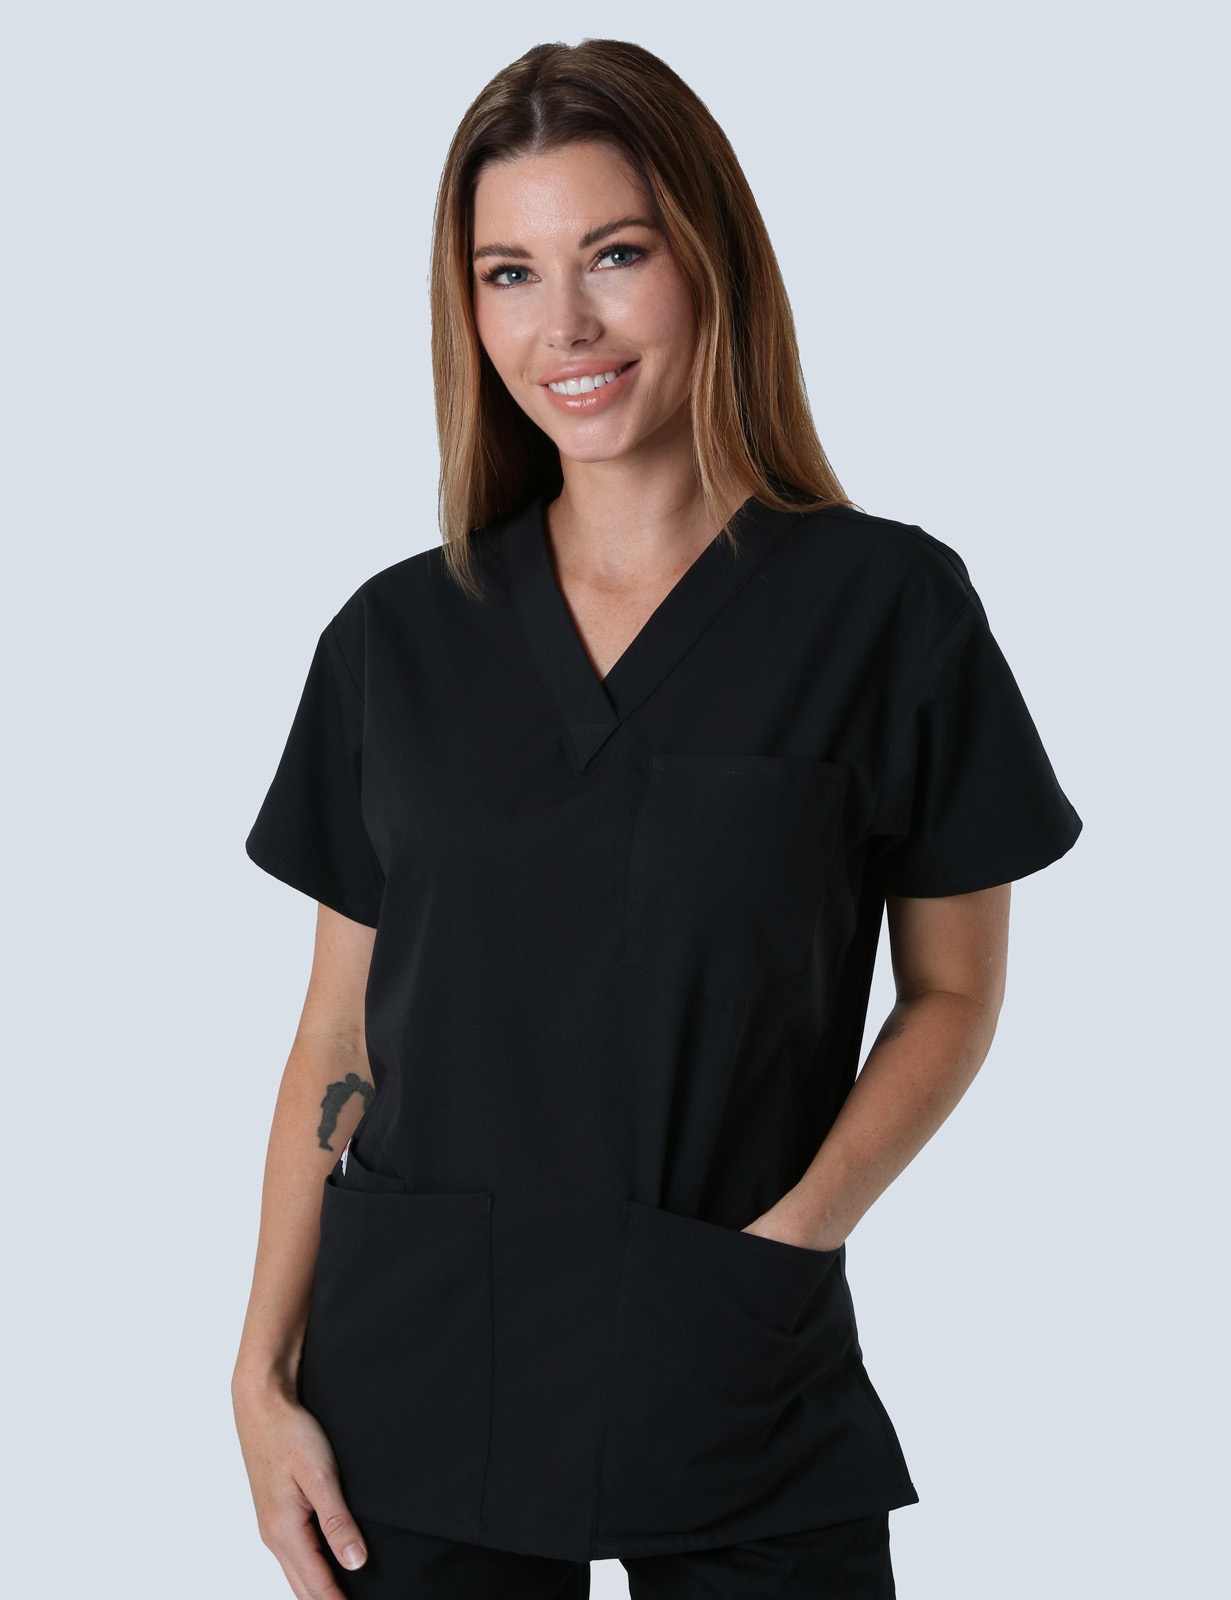 Lingard Private Hospital - Cardiology Department (4 Pocket Scrub Top and Cargo Pants in Black incl Logos)